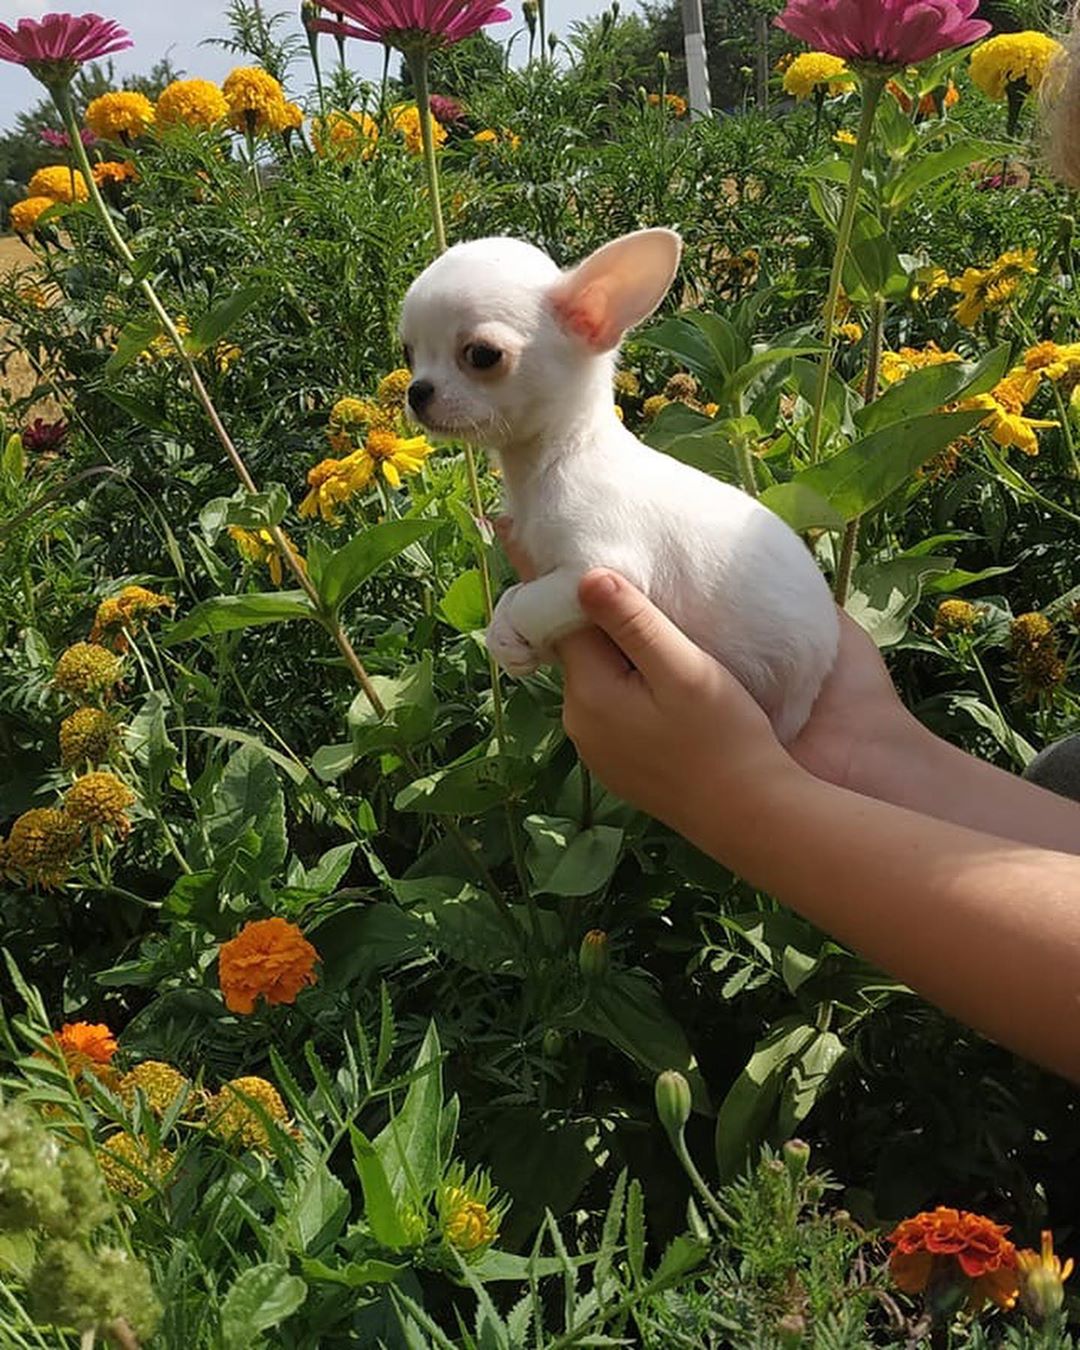 holding up a Chihuahua in the field of flowers